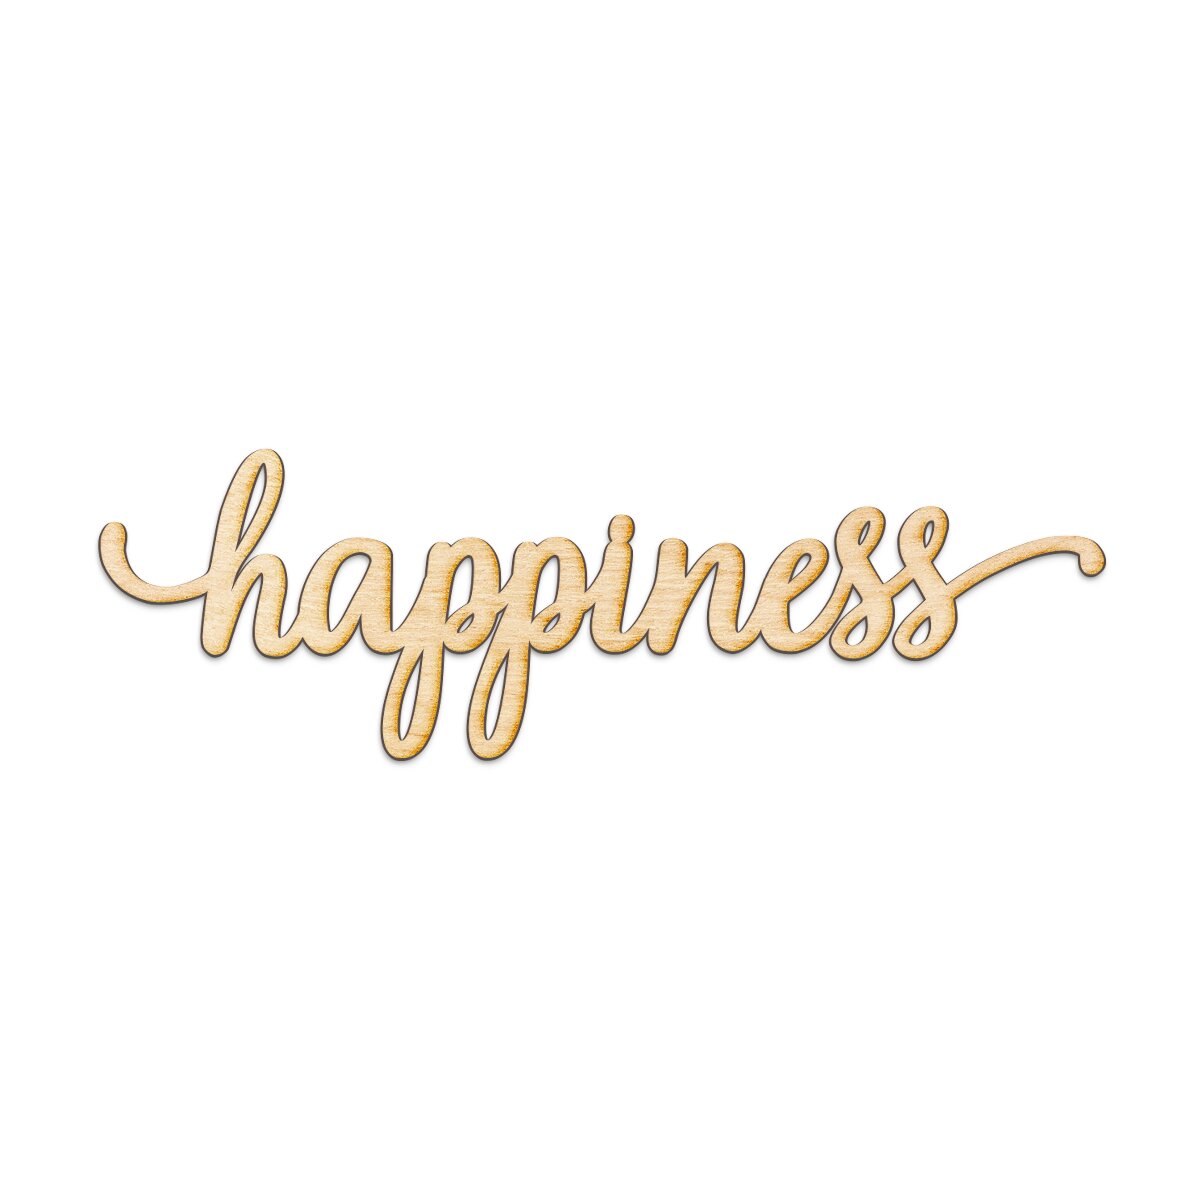 happiness written in cursive